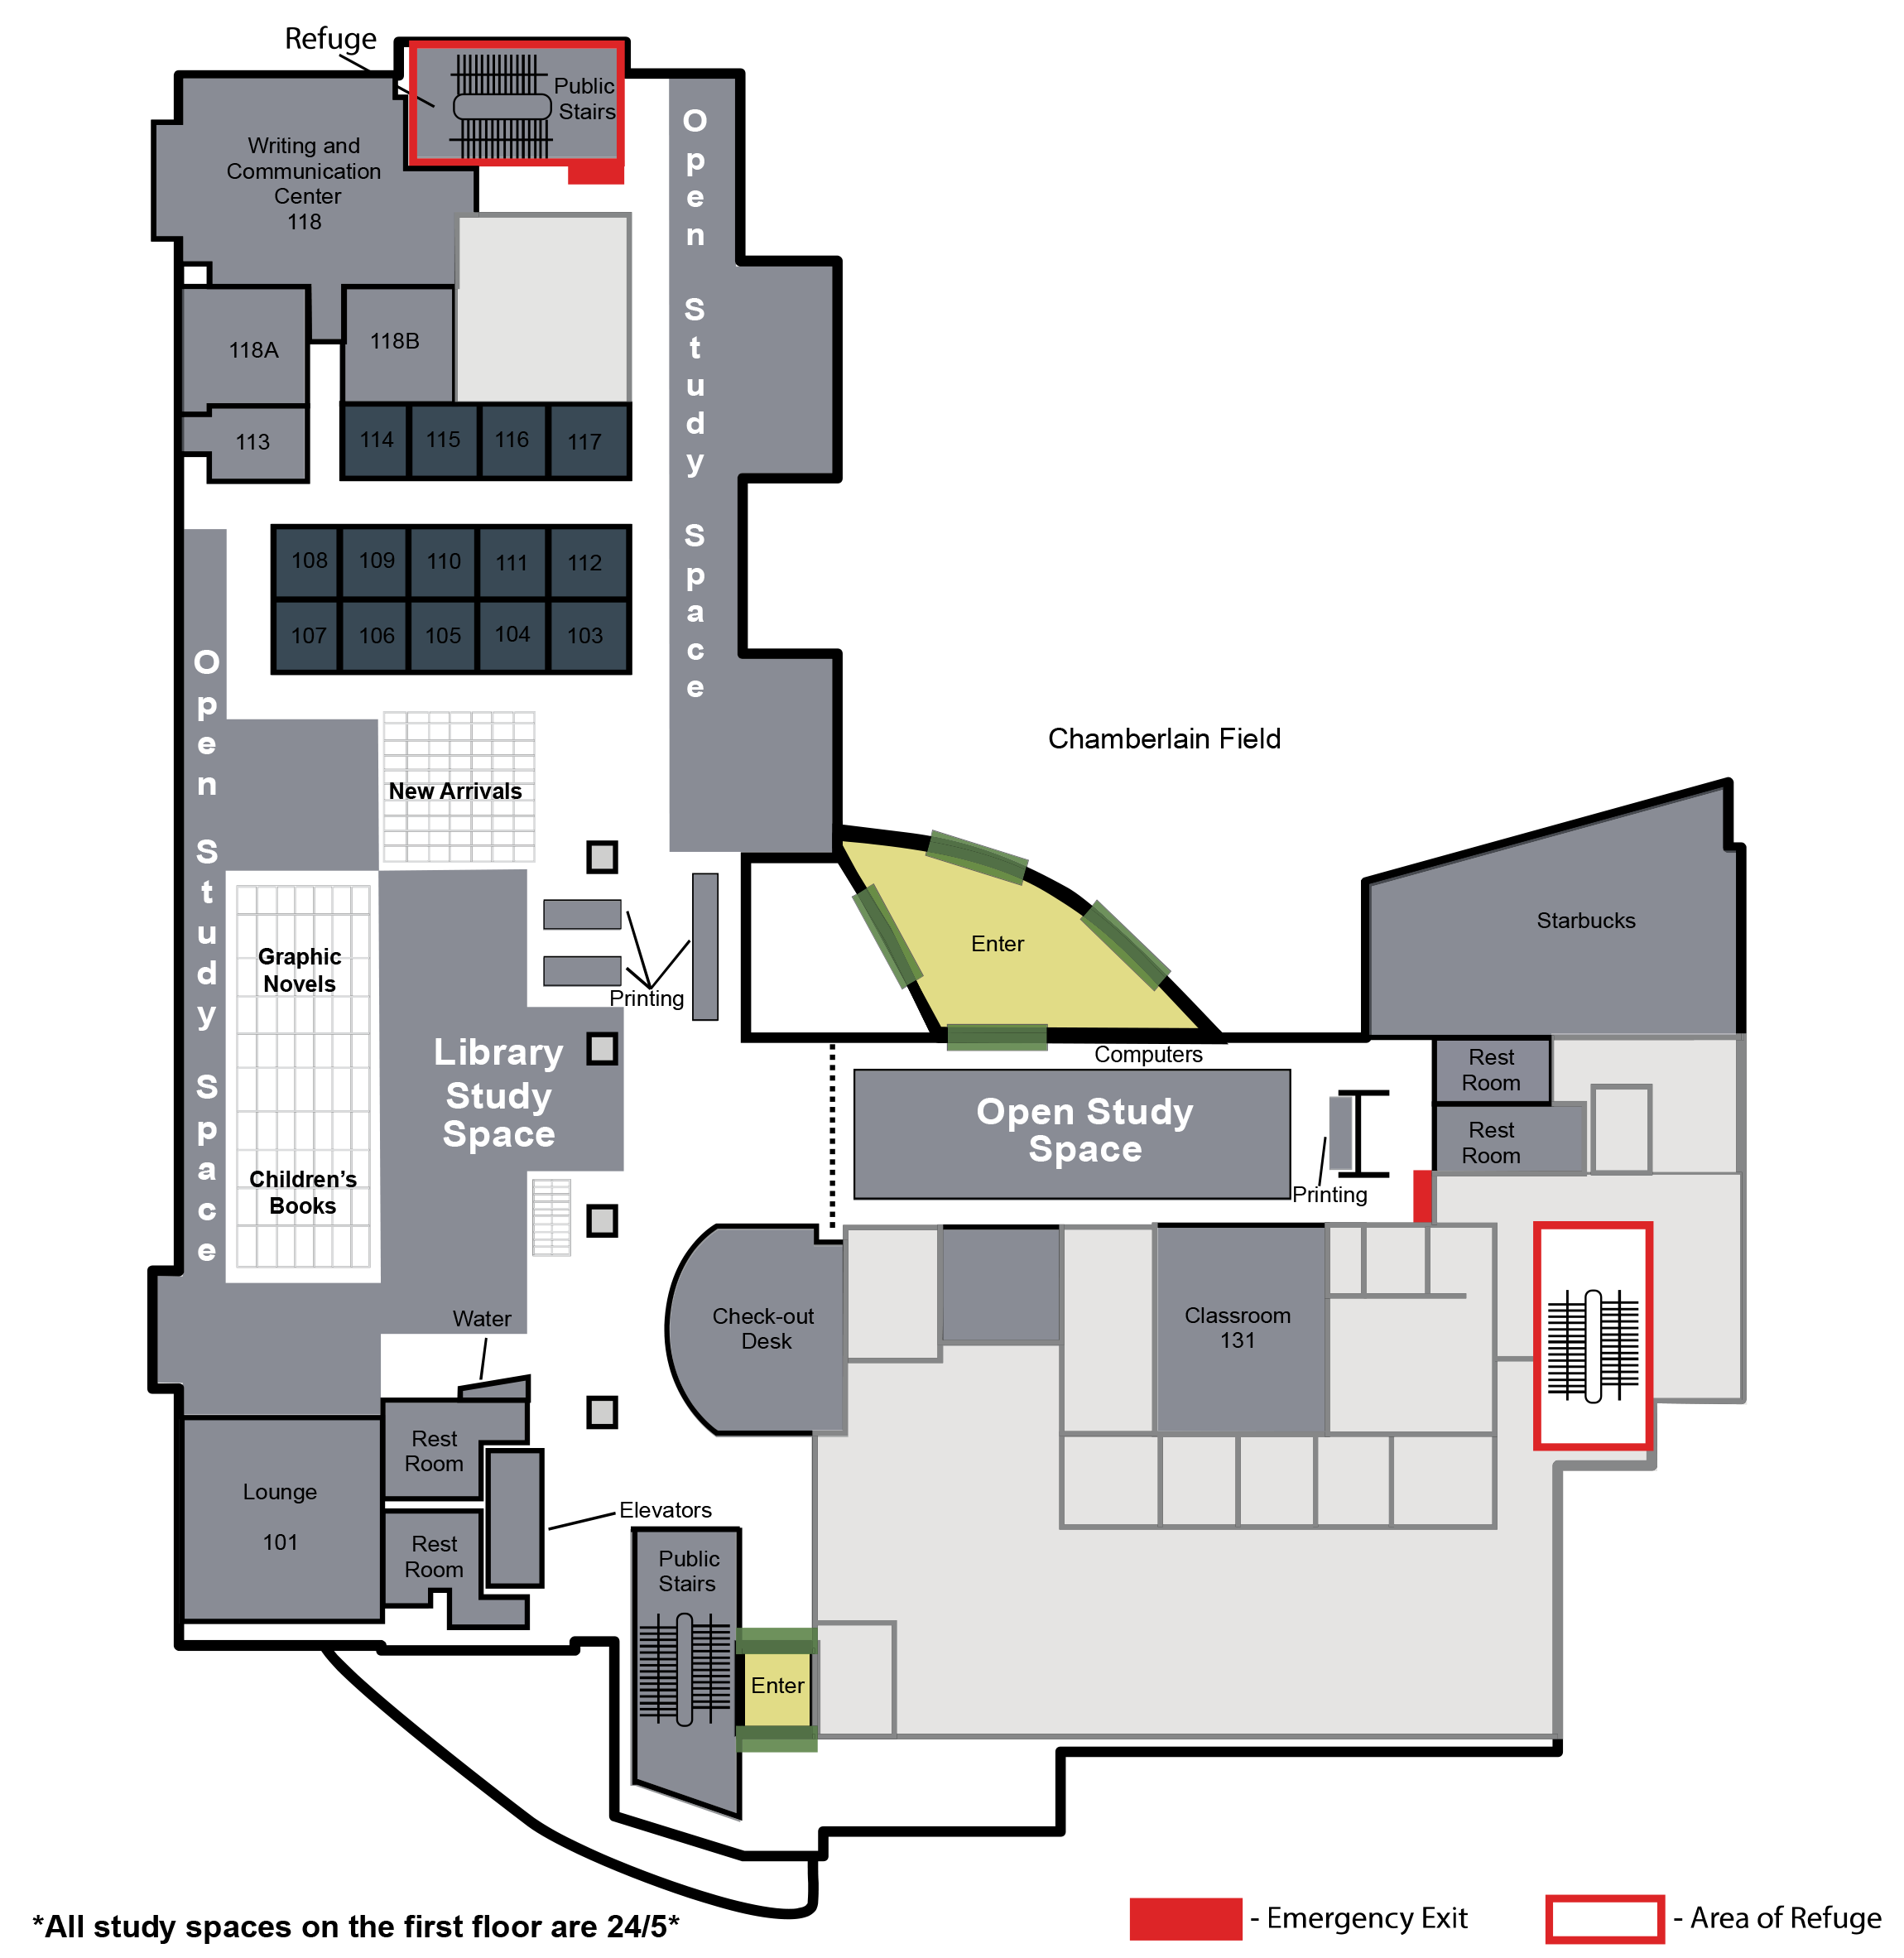 A map of the first floor of the library